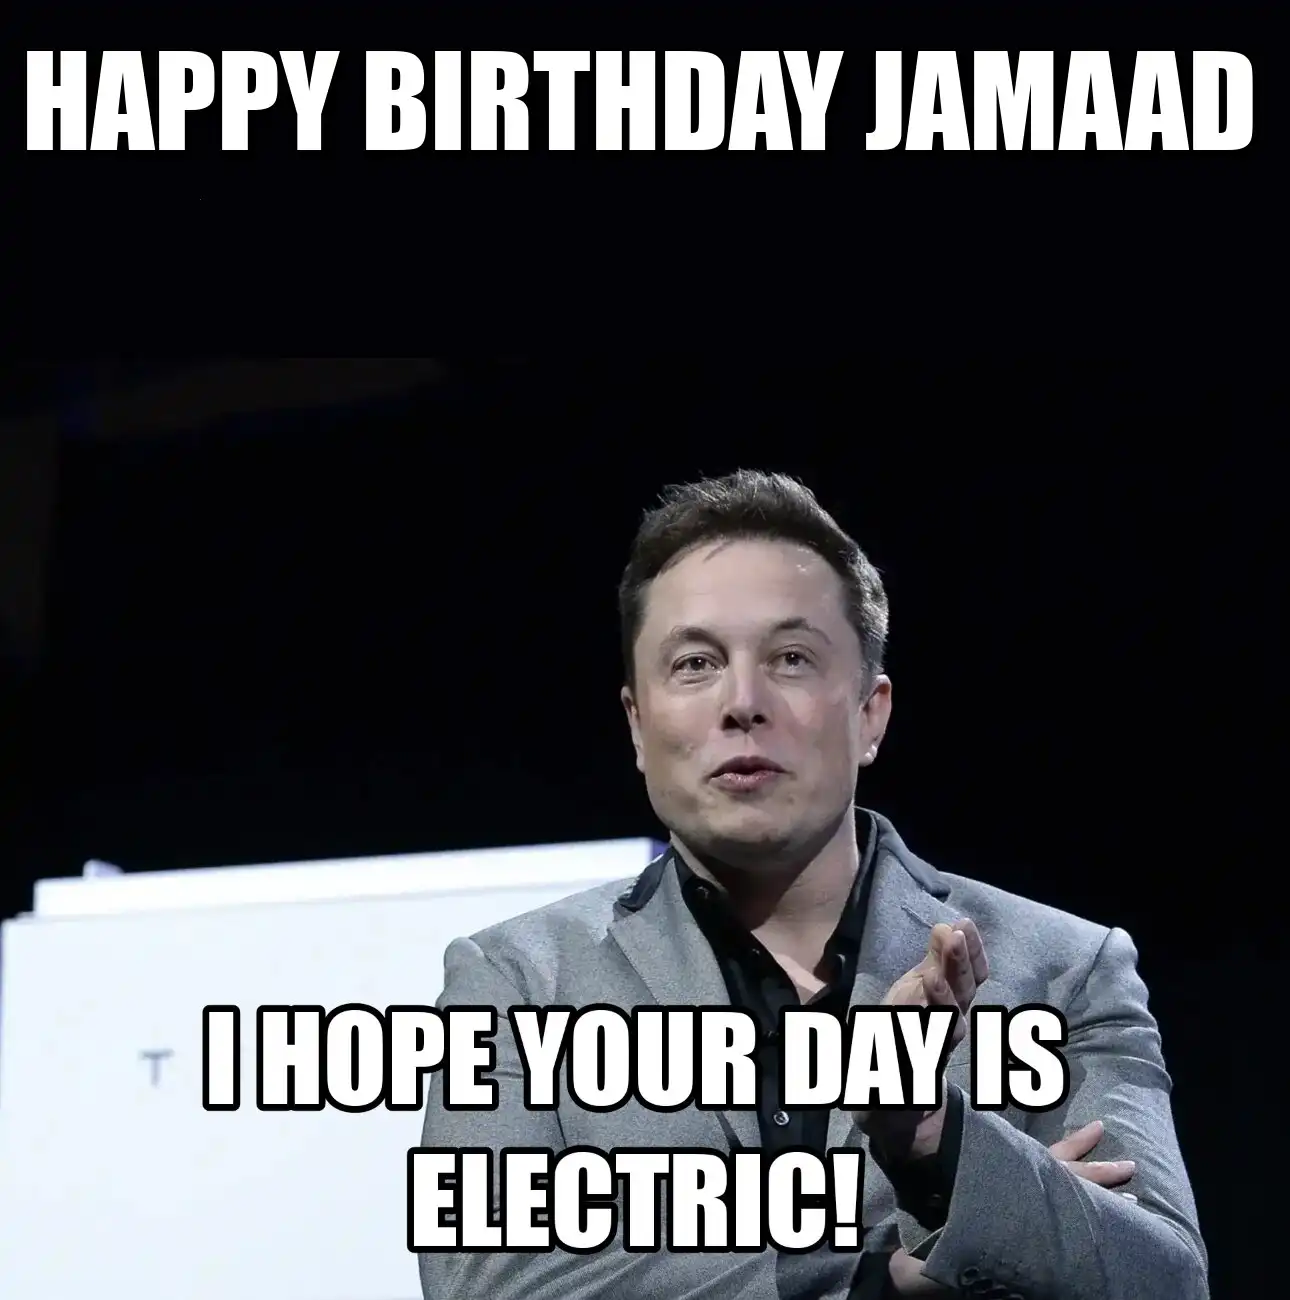 Happy Birthday Jamaad I Hope Your Day Is Electric Meme